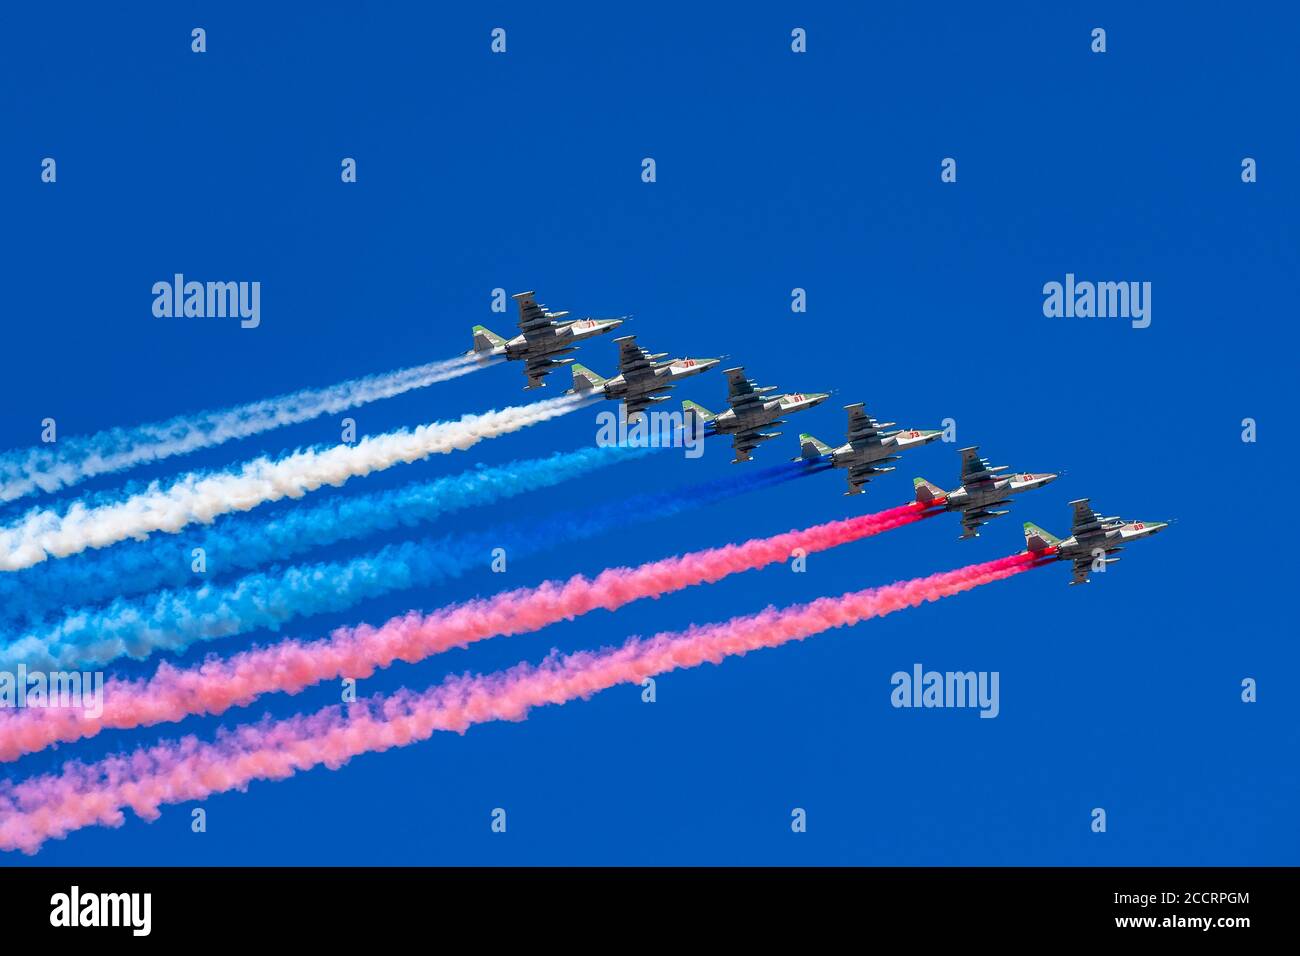 St. Petersburg, Russia. - July 26, 2020: The group of Russian fighters Sukhoi Su-25 in the sky. Navy day parade in St. Petersburg, Russia. Stock Photo